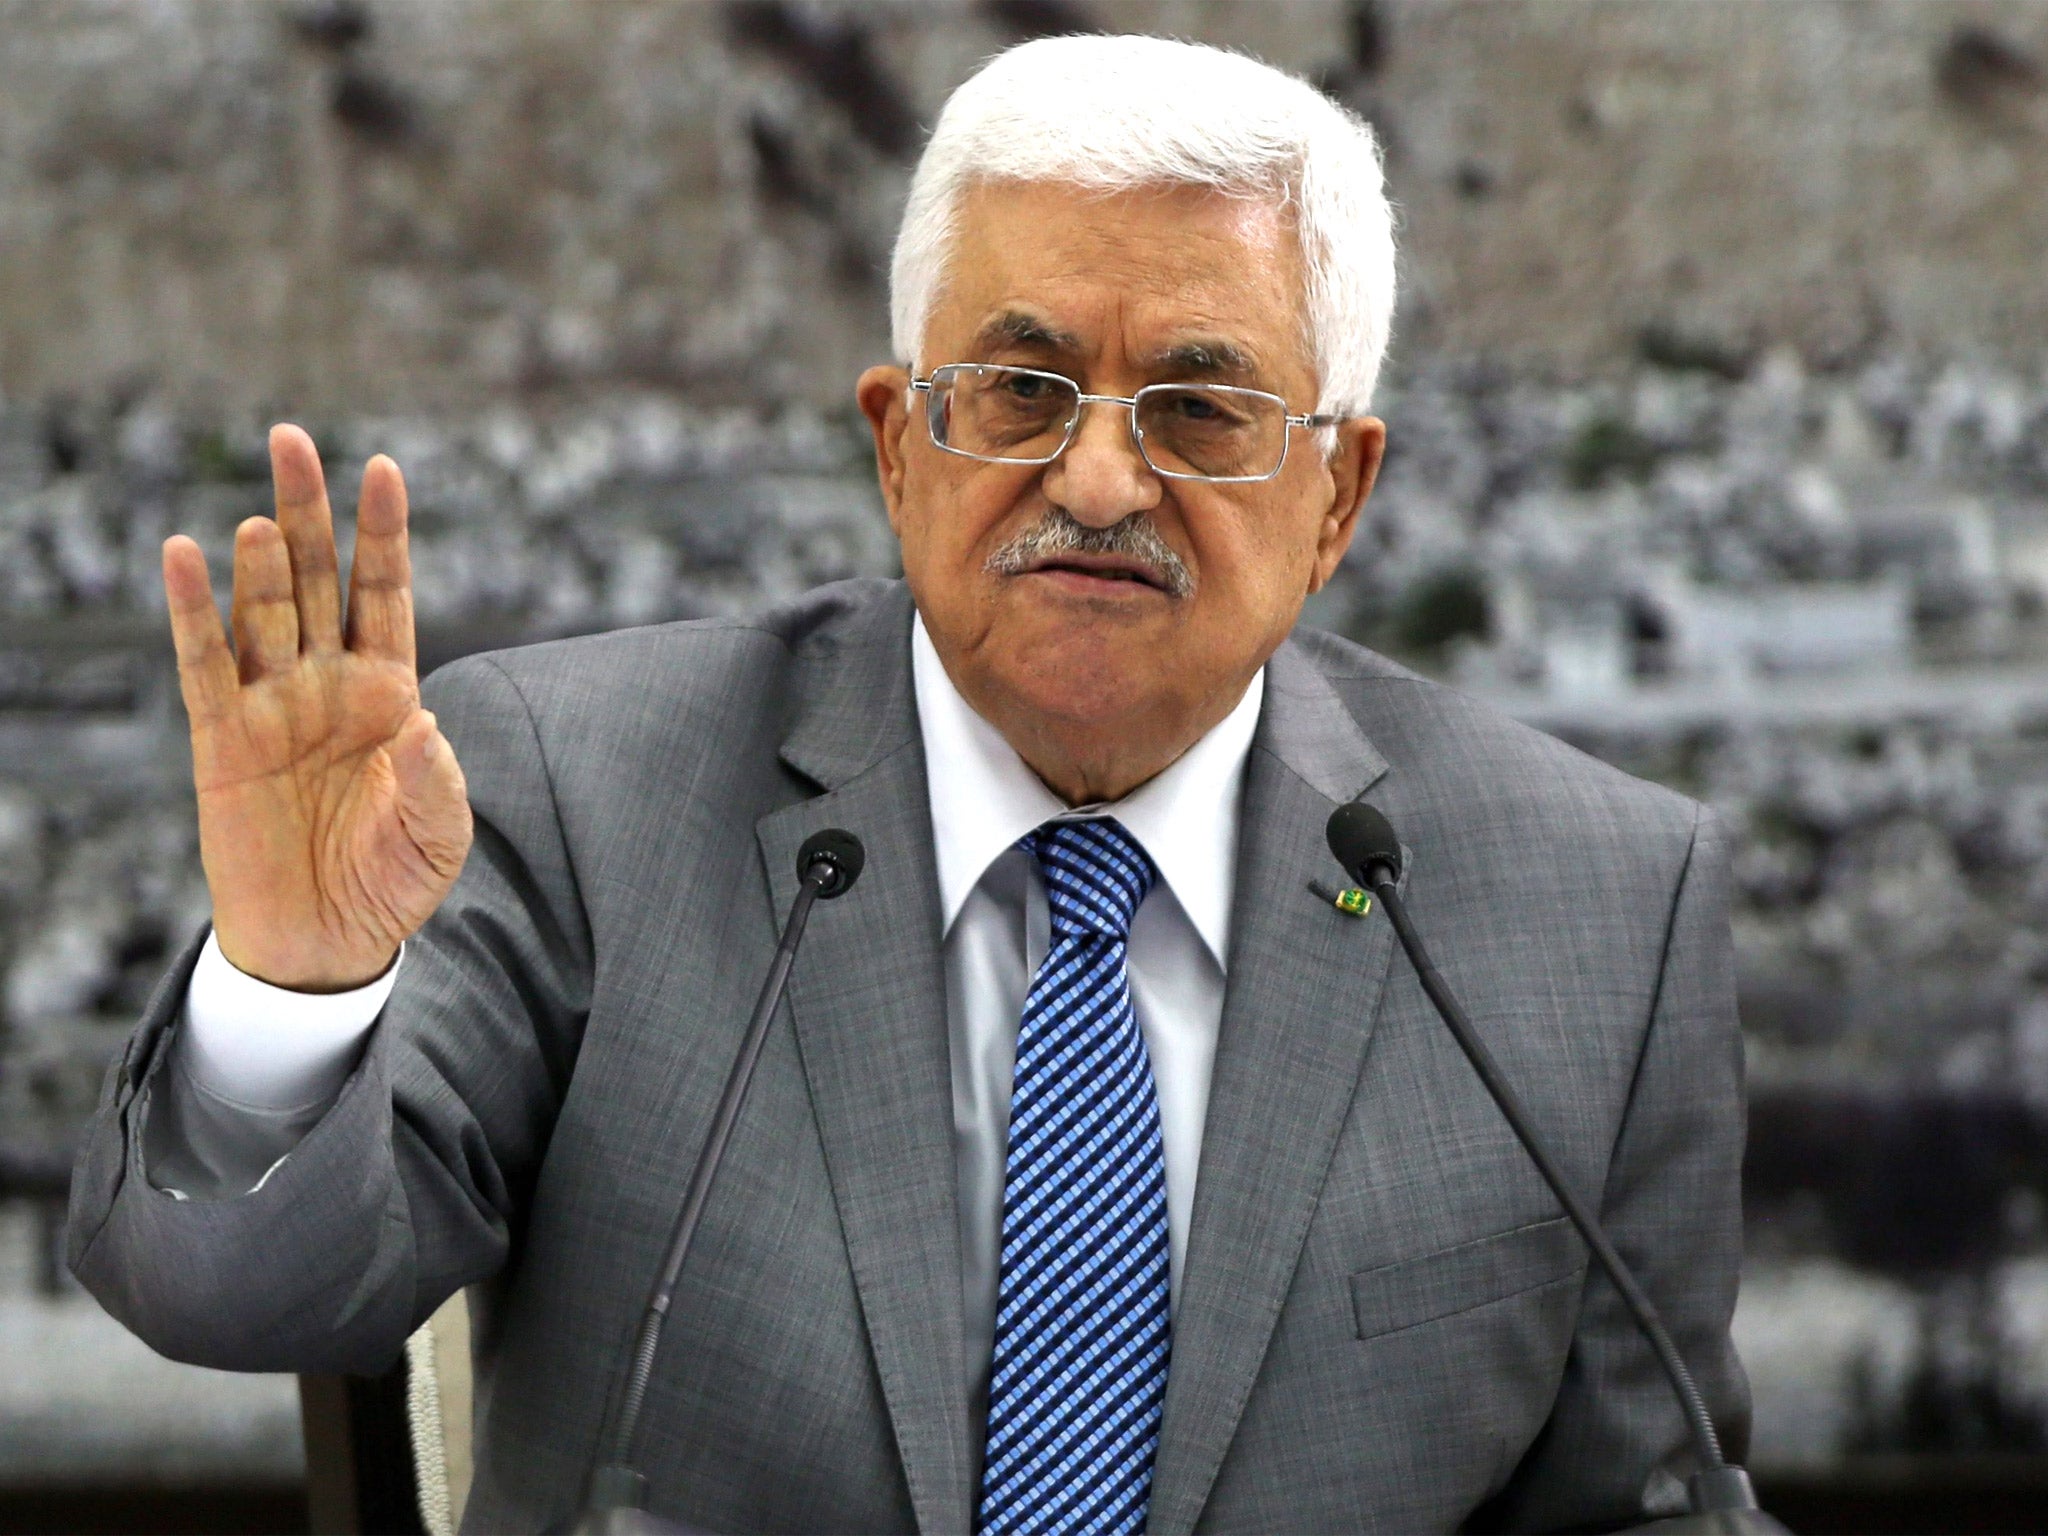 Palestinian President Mahmoud Abbas speaking in the West Bank town of Ramallah